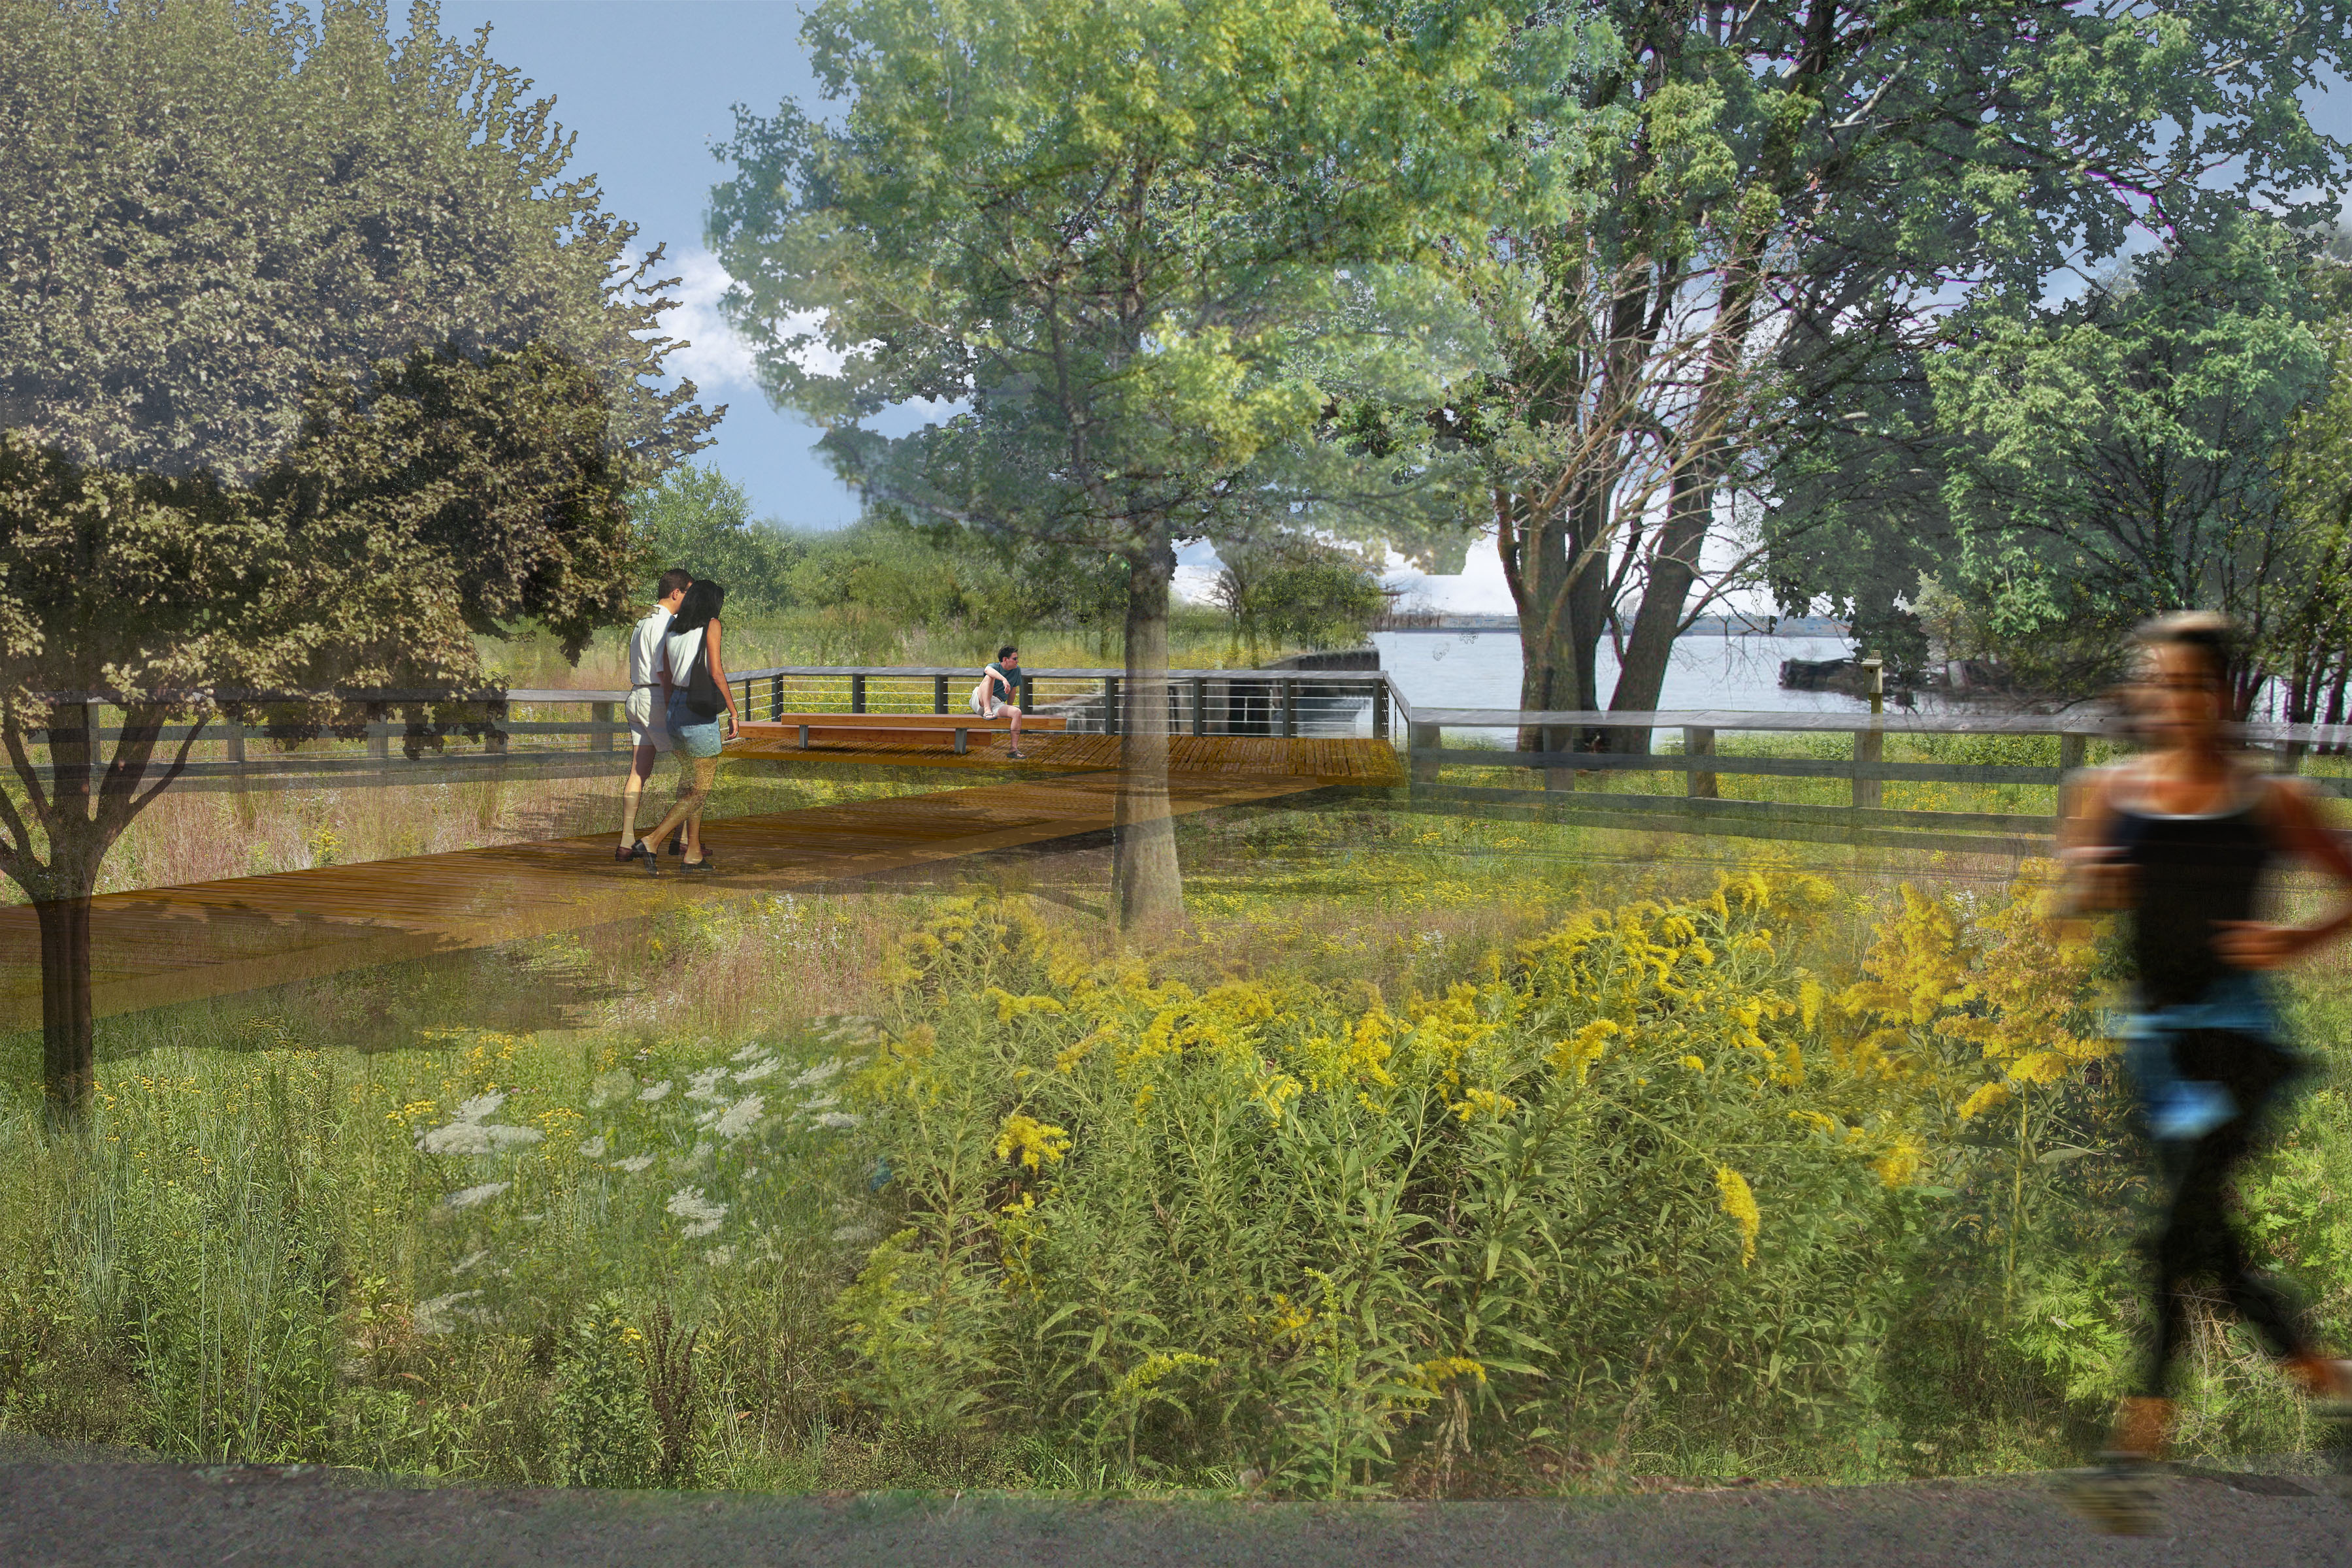 Rendering of a seating area to be added to the southern portion of the trail